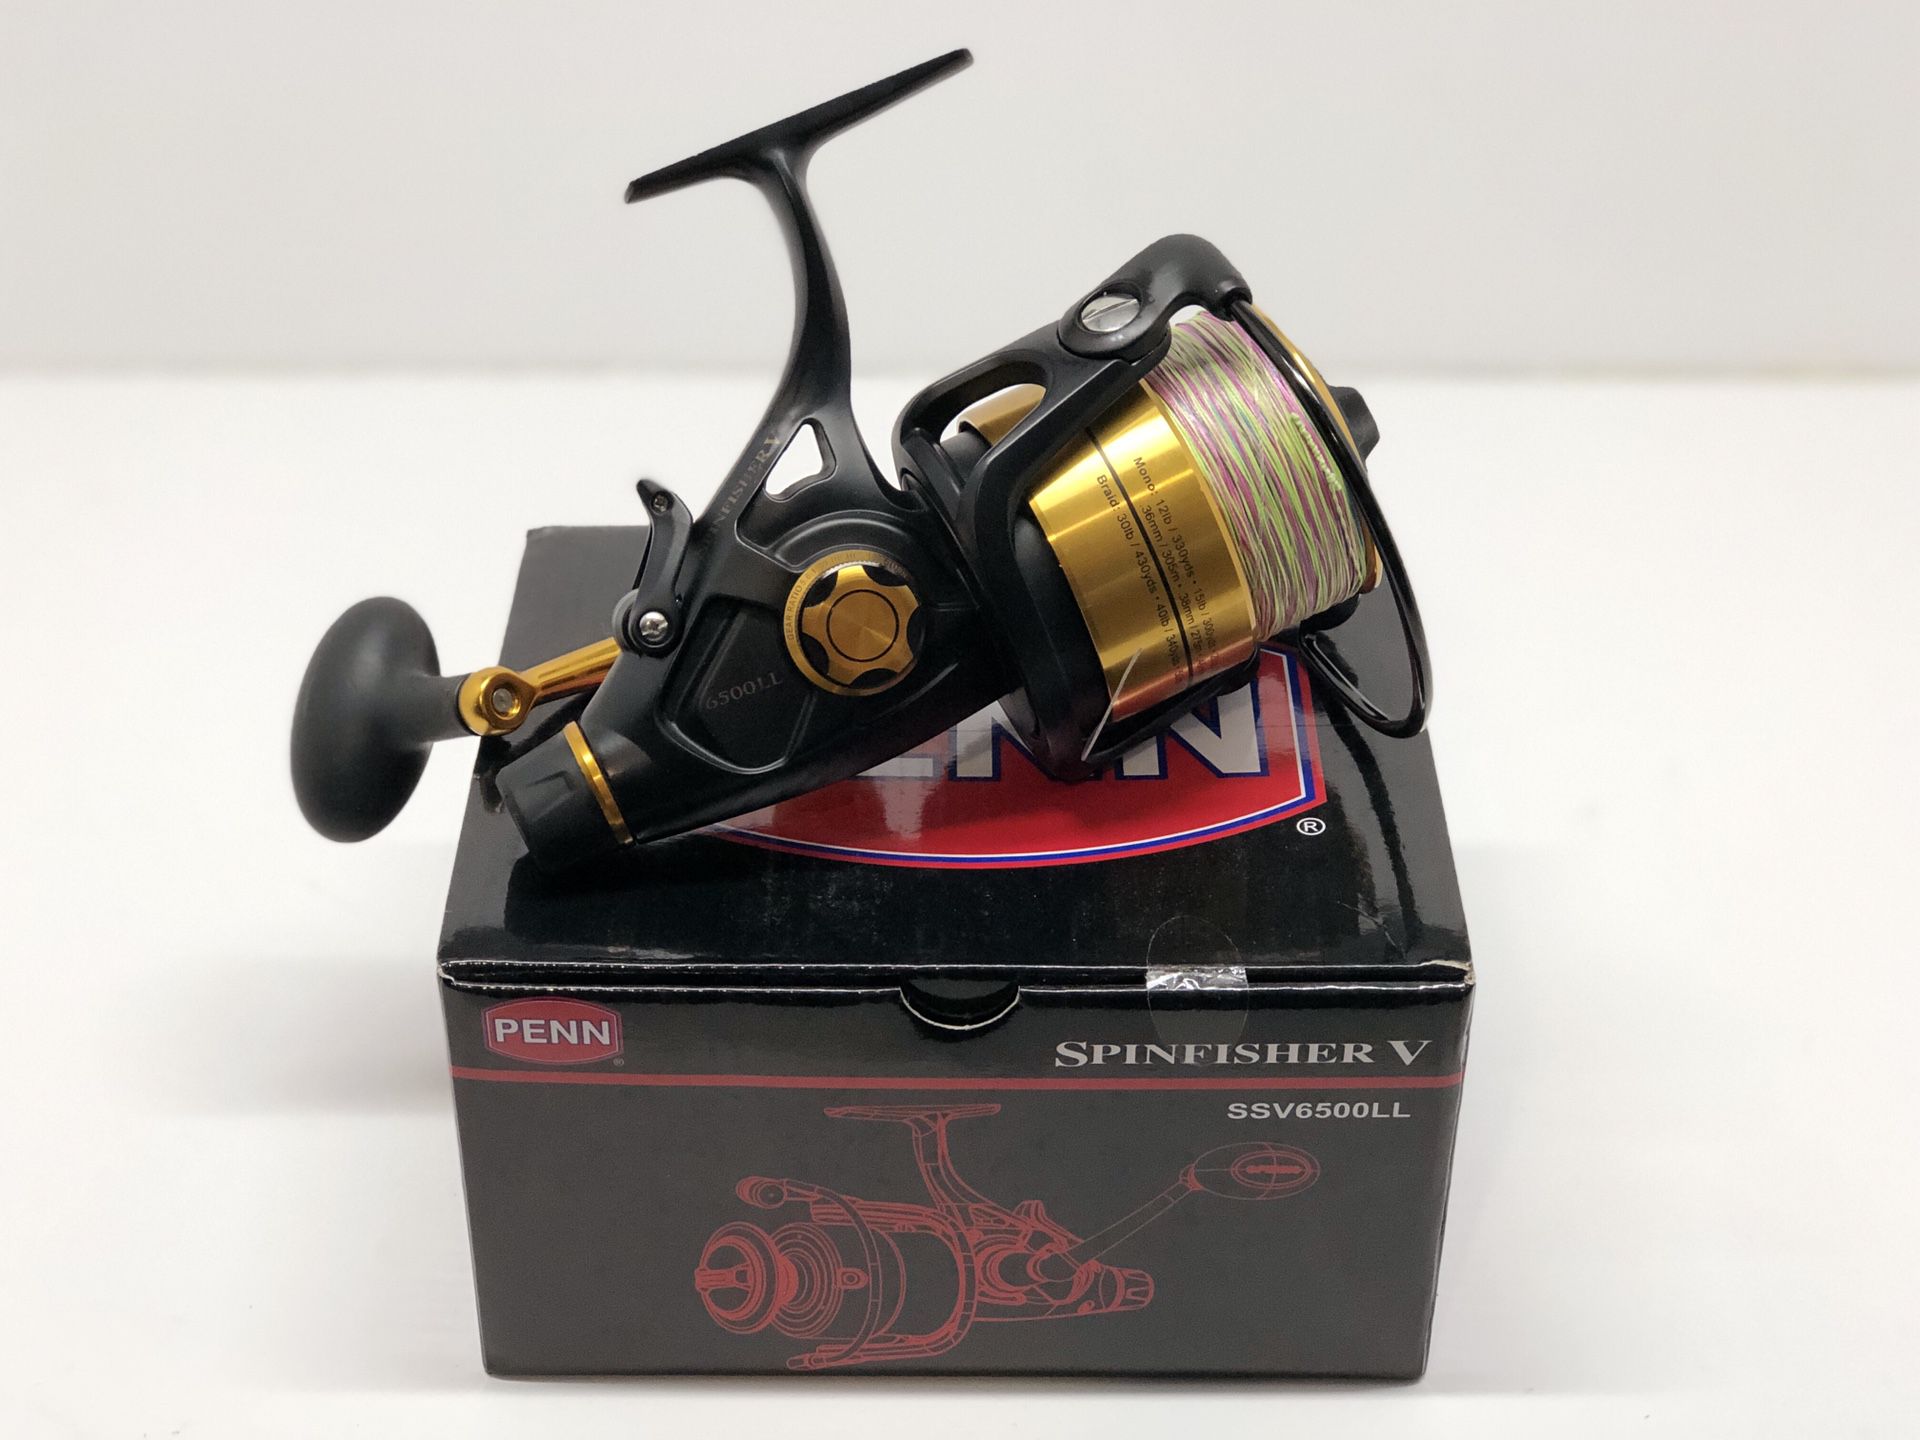 Penn Spinfisher SSV6500LL Spinning Fishing Saltwater Reel with 65lb Spectra Line